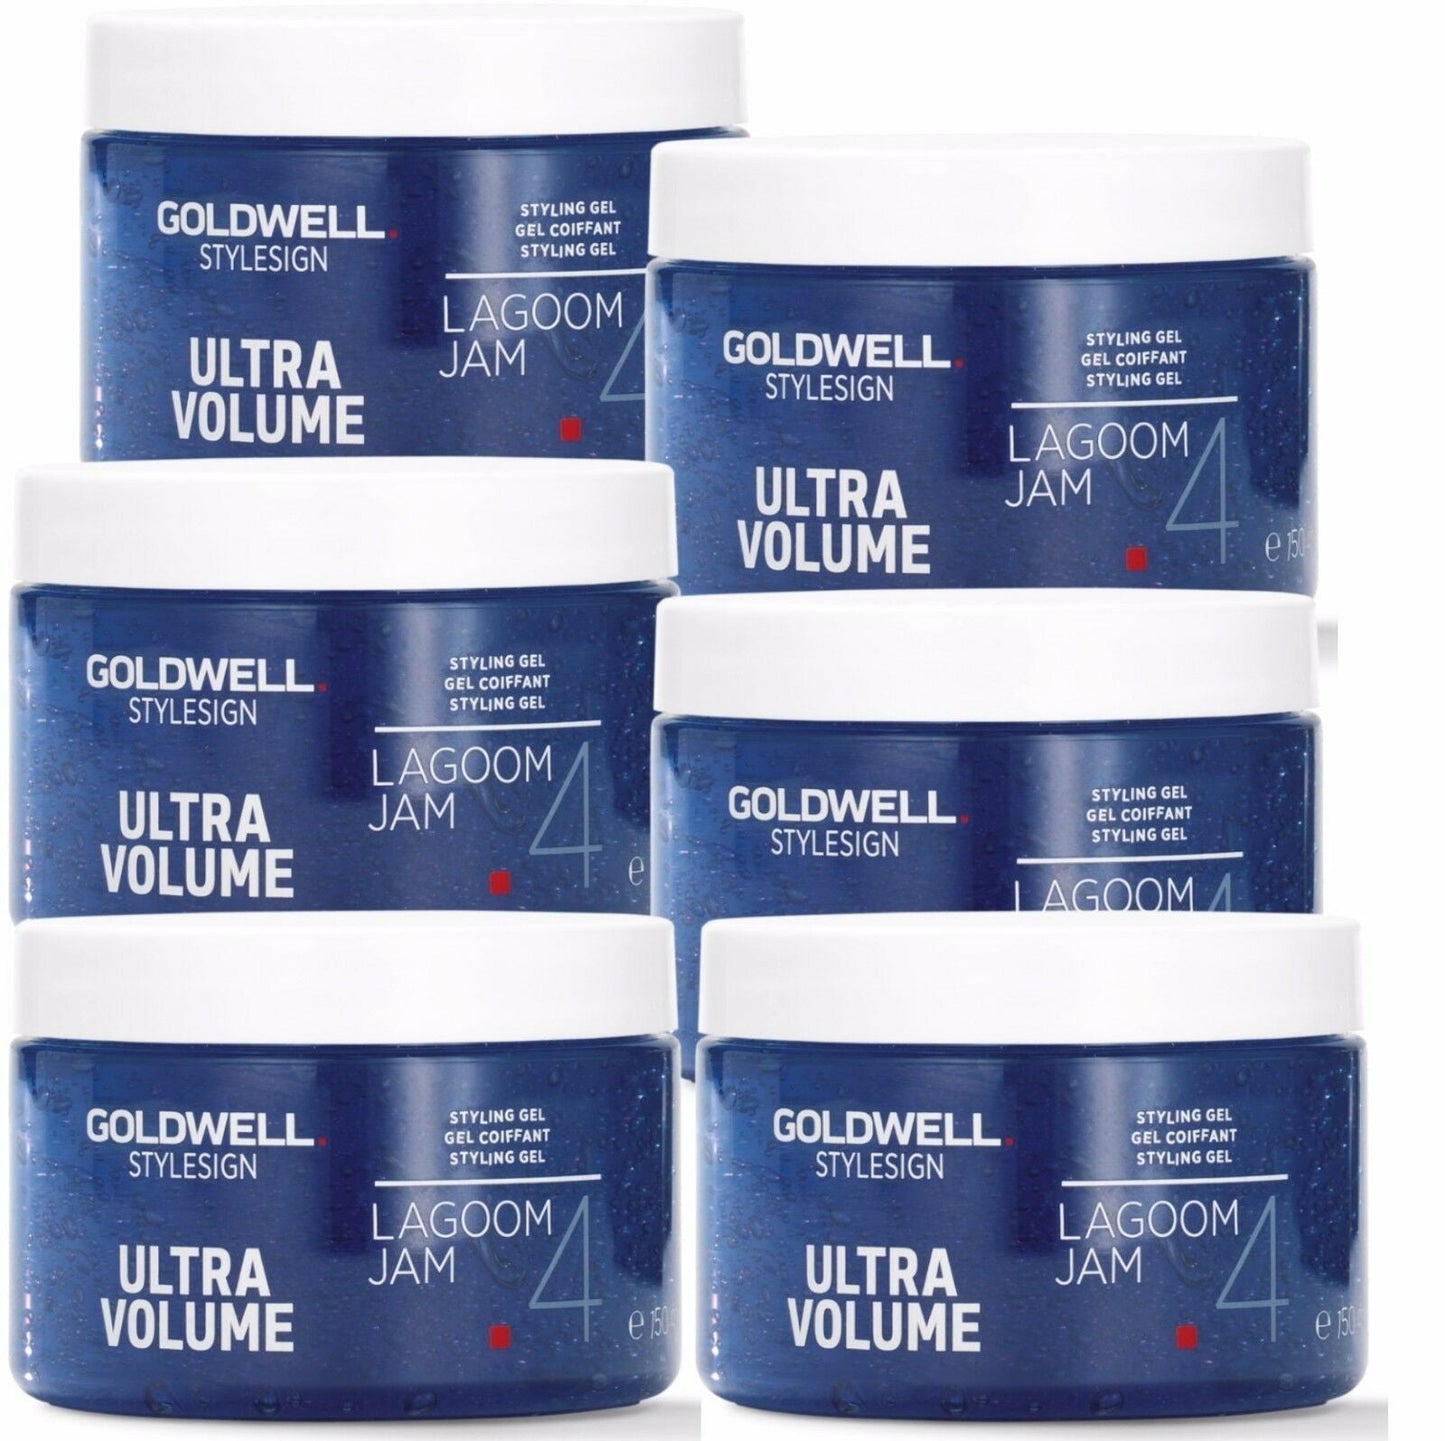 Goldwell Stylesign Ultra Volume Lagoom Jam 6 x 150ml Pack - shelley and co